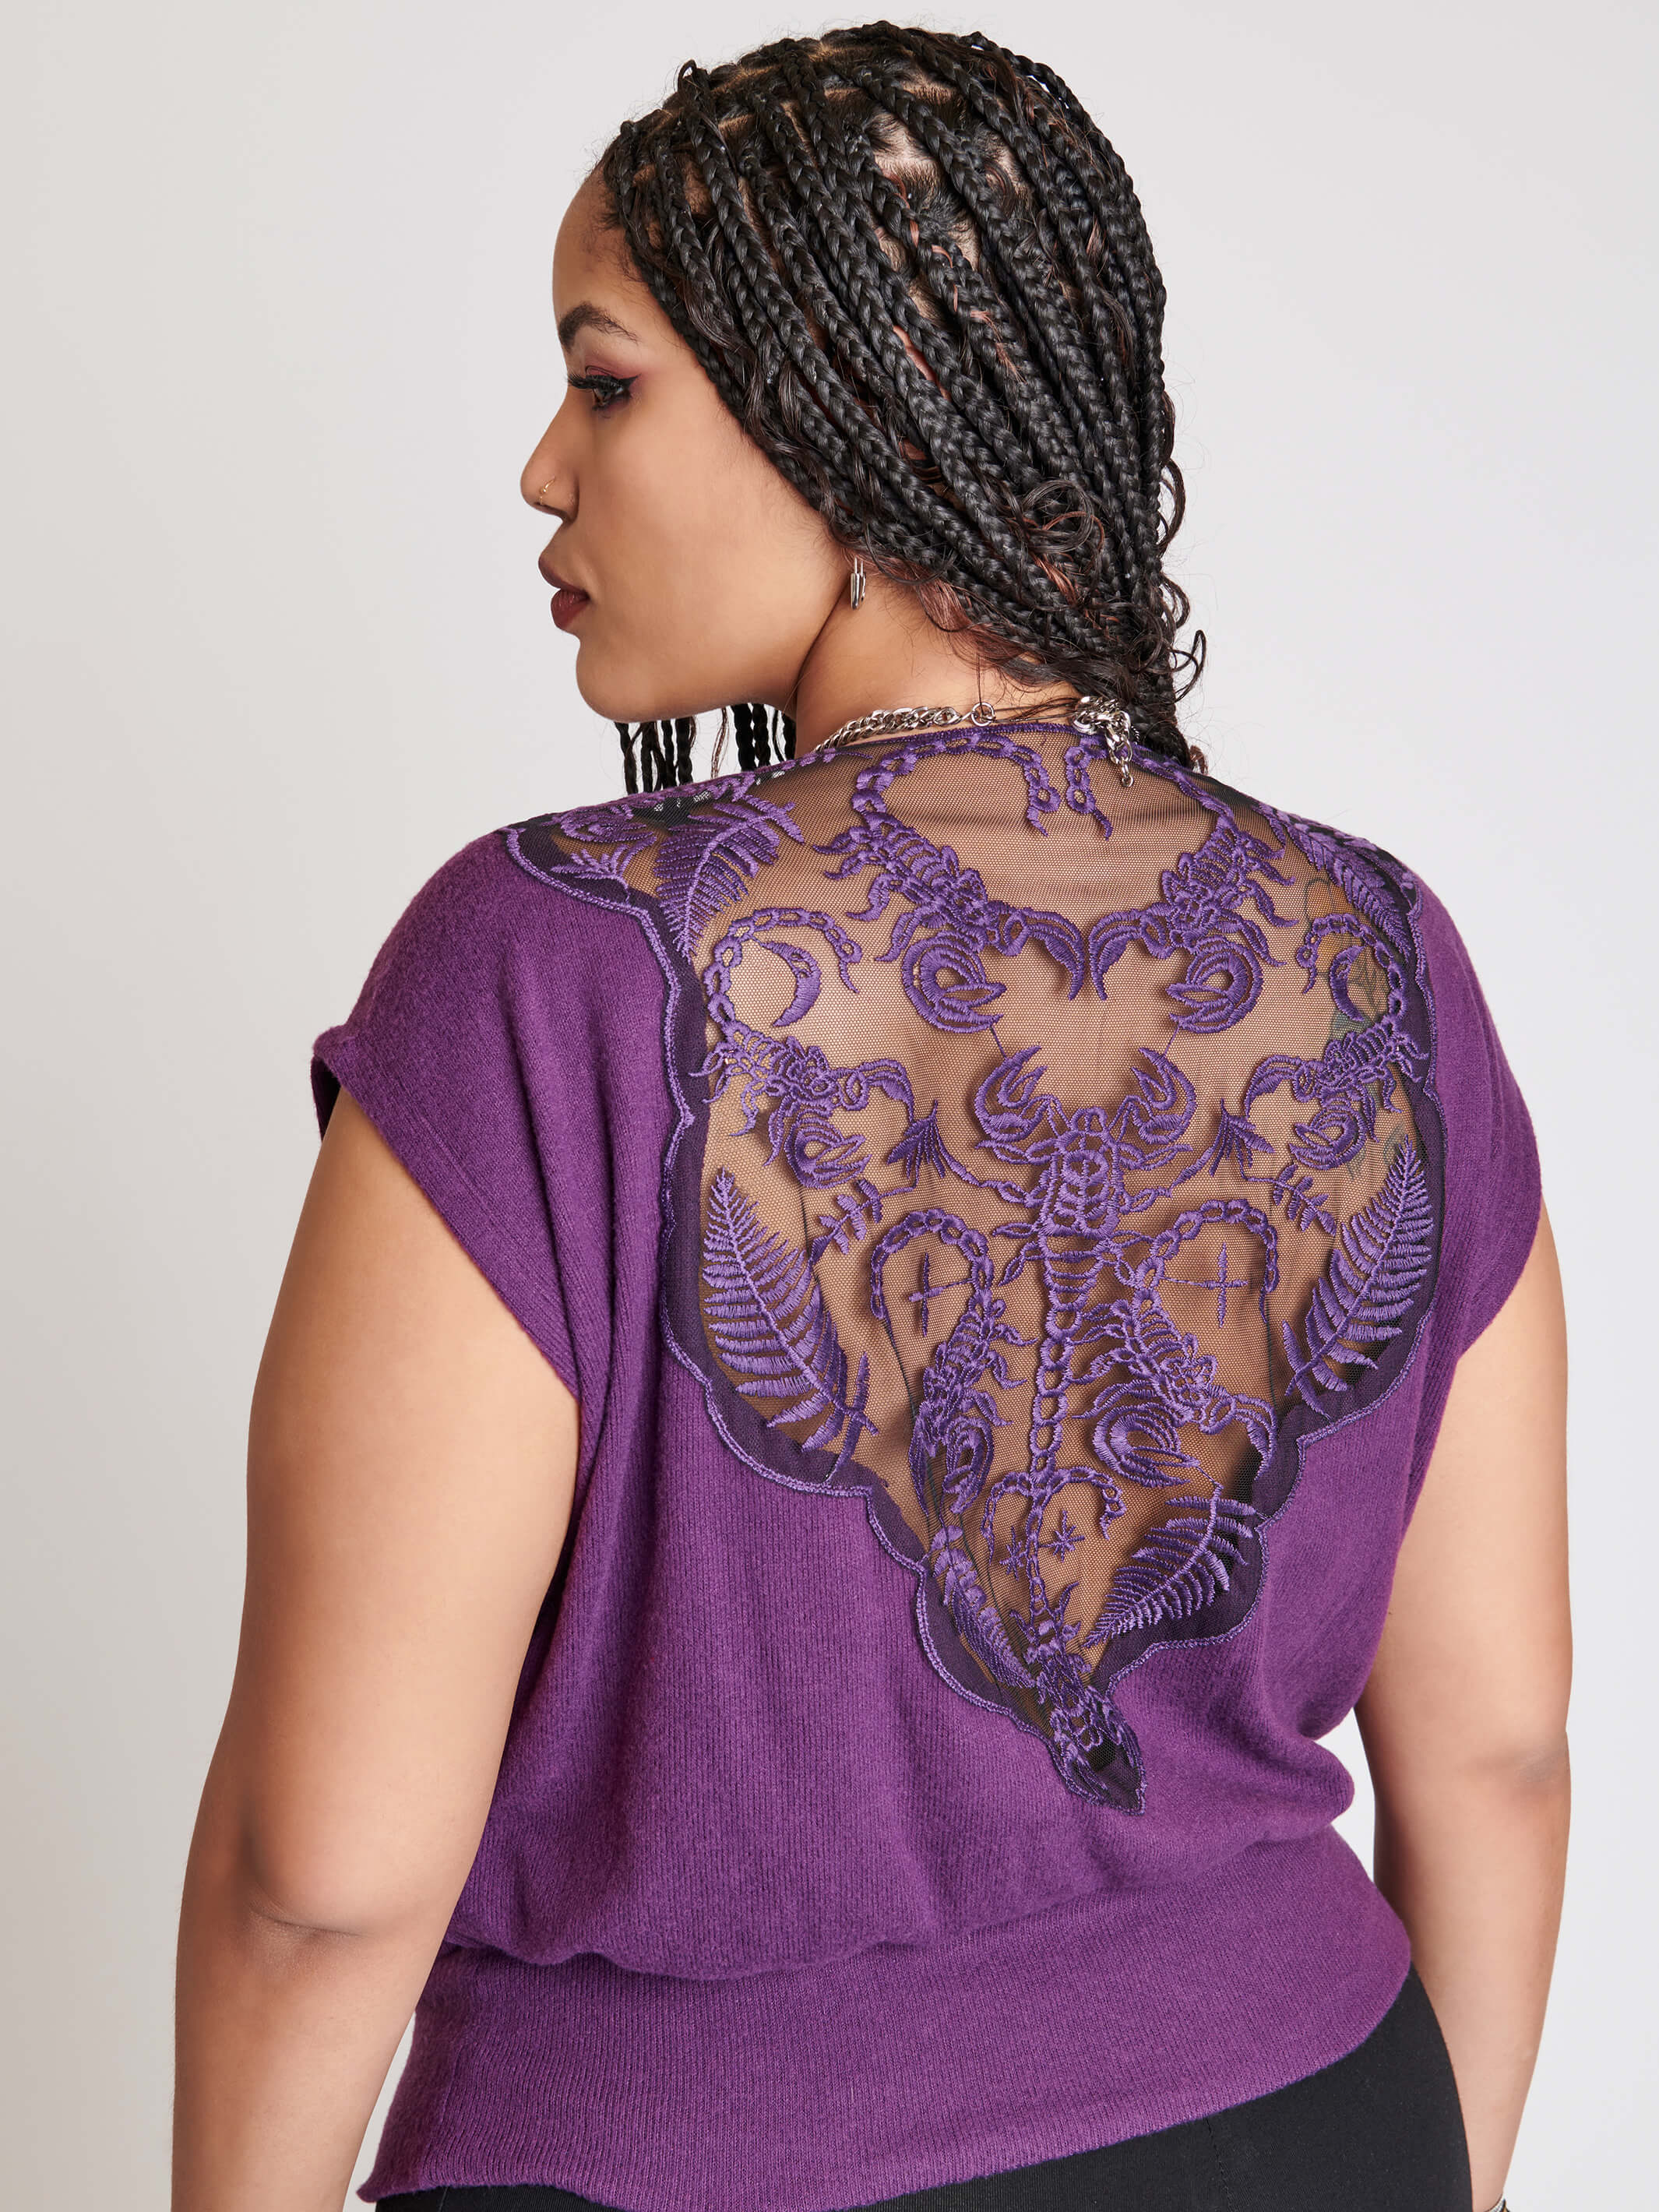 PURPLE SCORPION EMBROIDERED sweater TOP